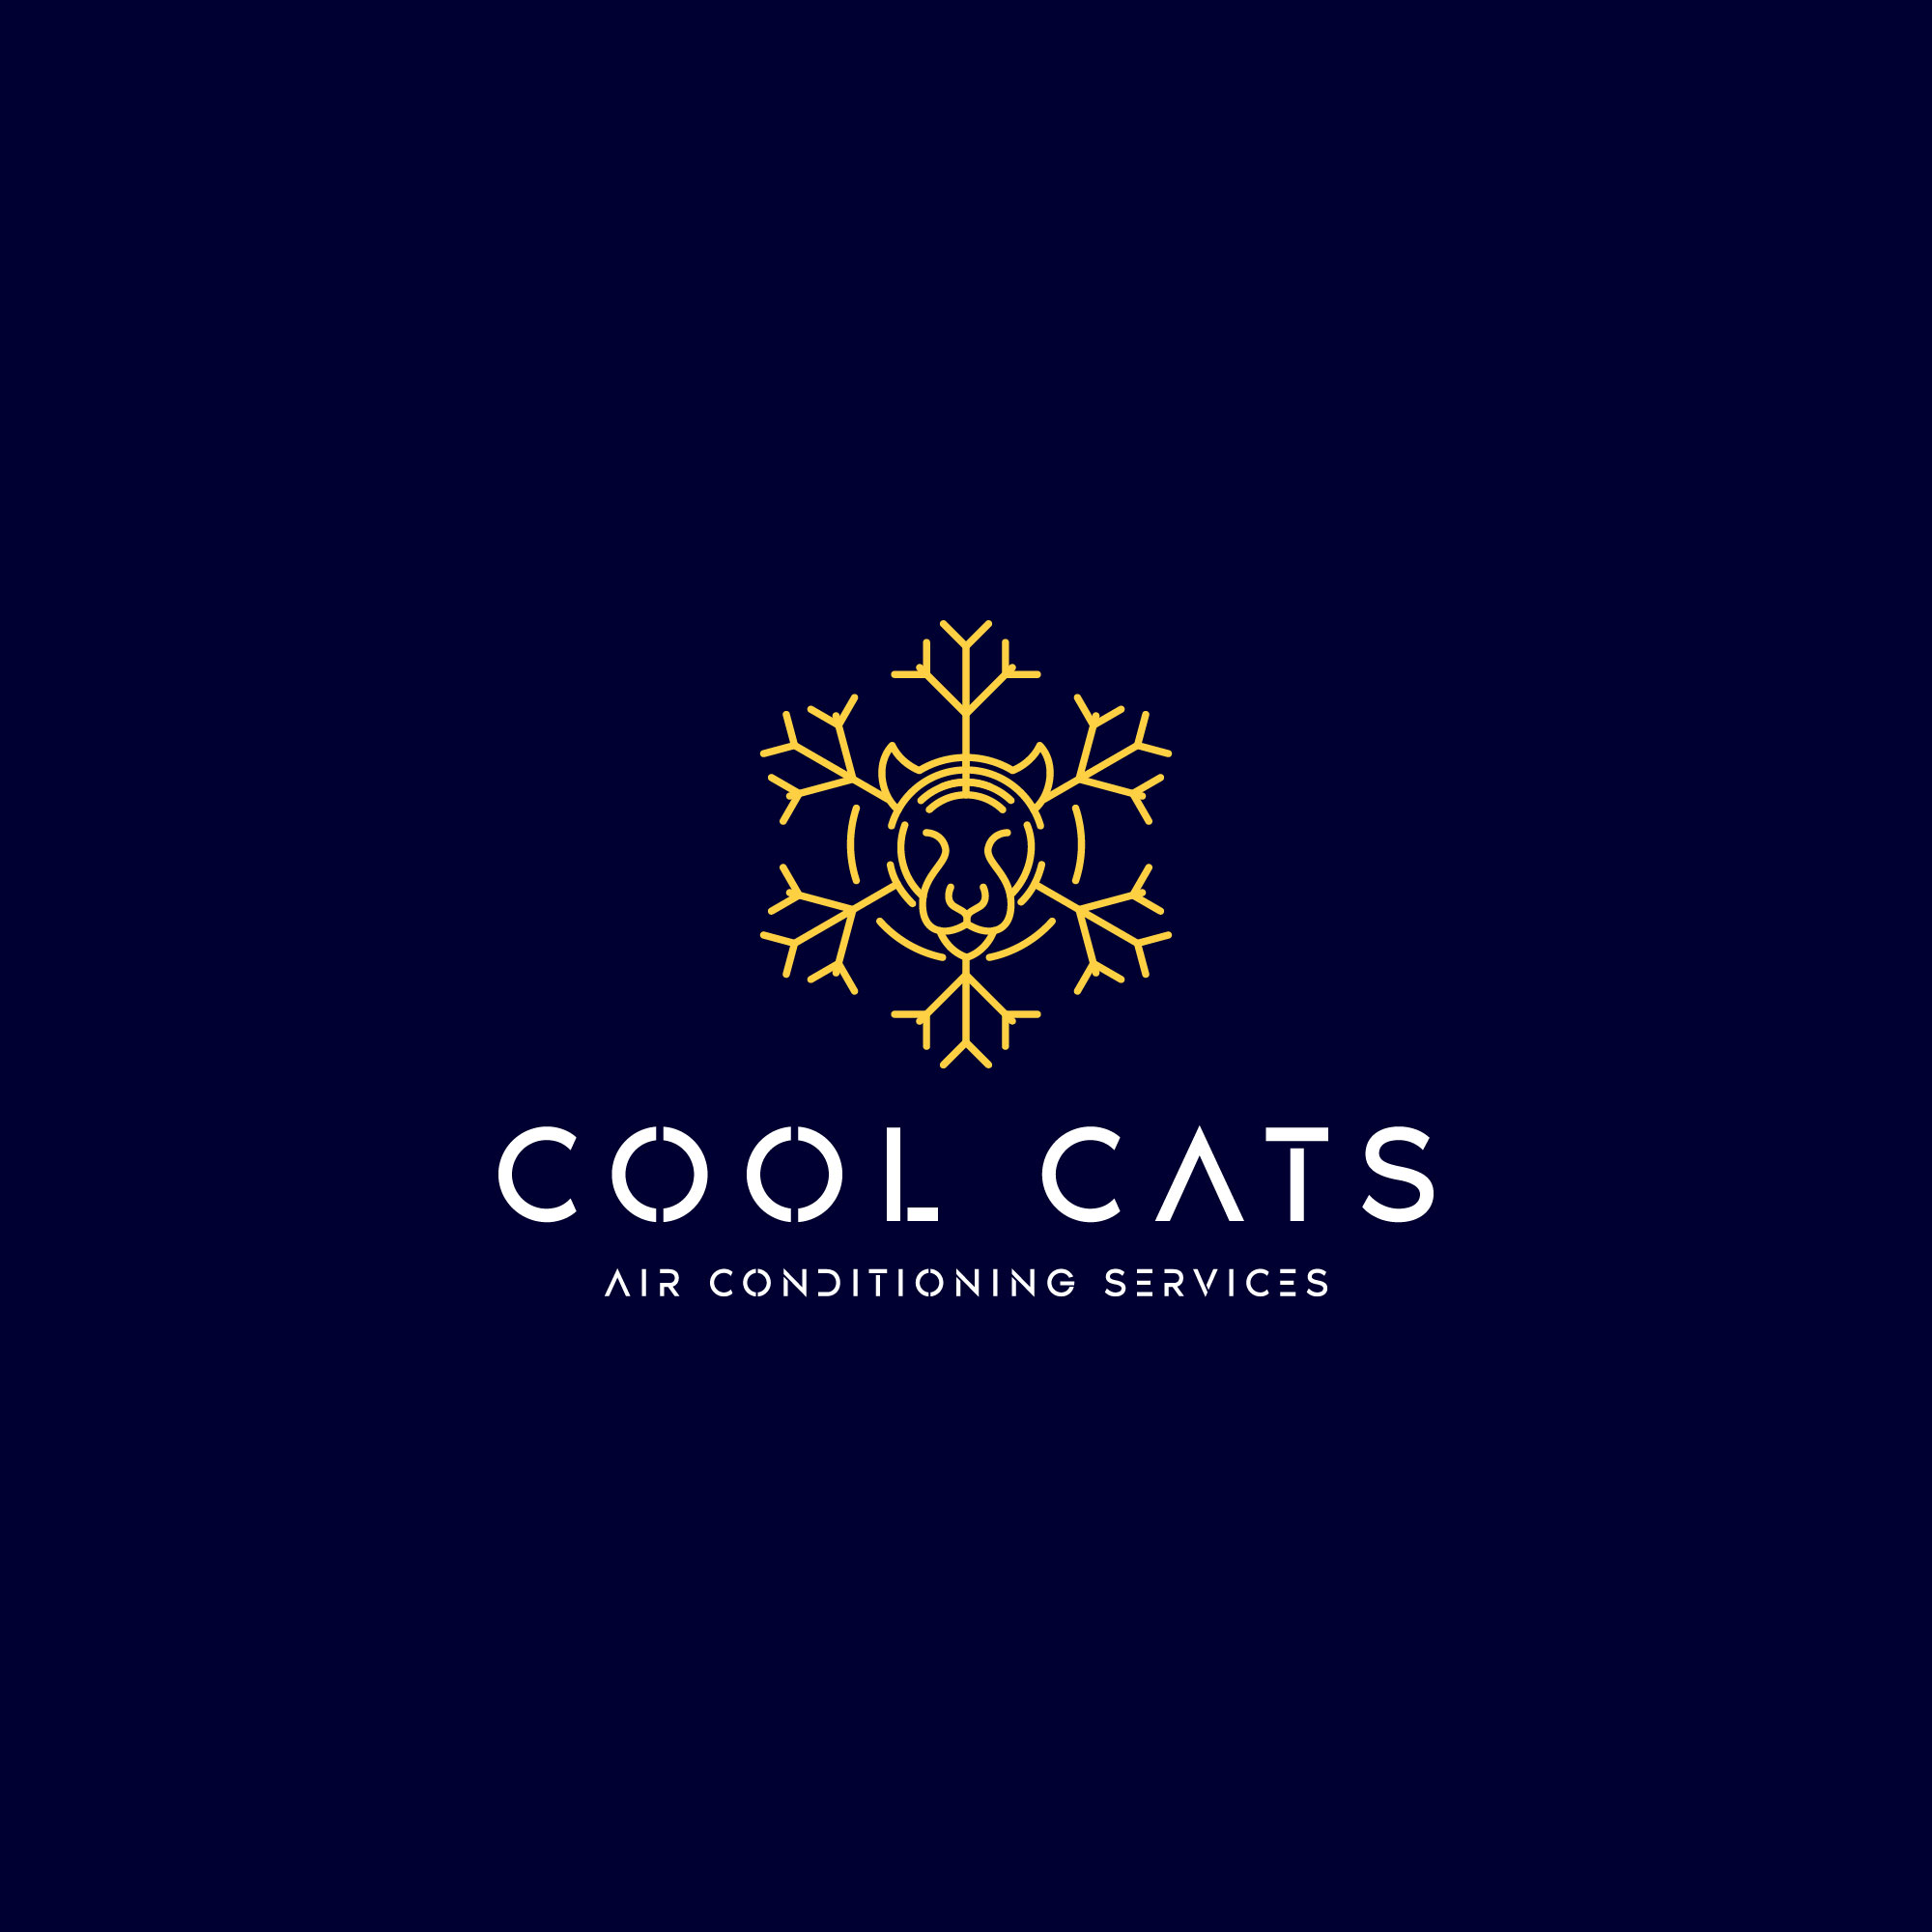 Logo of Cool Cats Air Conditioning Services Ltd Air Conditioning And Refrigeration In Lowestoft, Suffolk